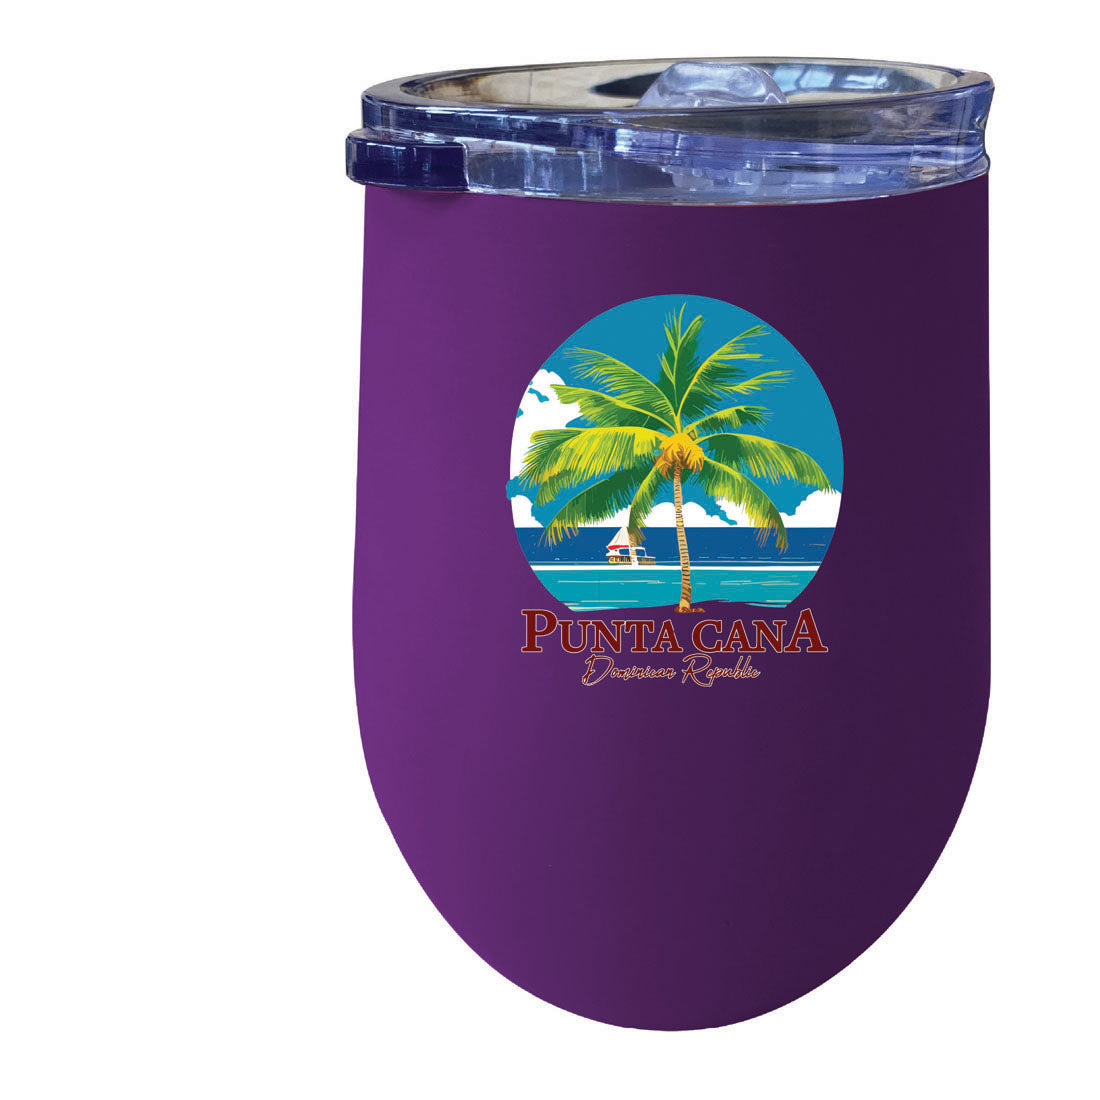 Punta Cana Dominican Republic Souvenir 12 Oz Insulated Wine Stainless Steel Tumbler - Purple, PALM